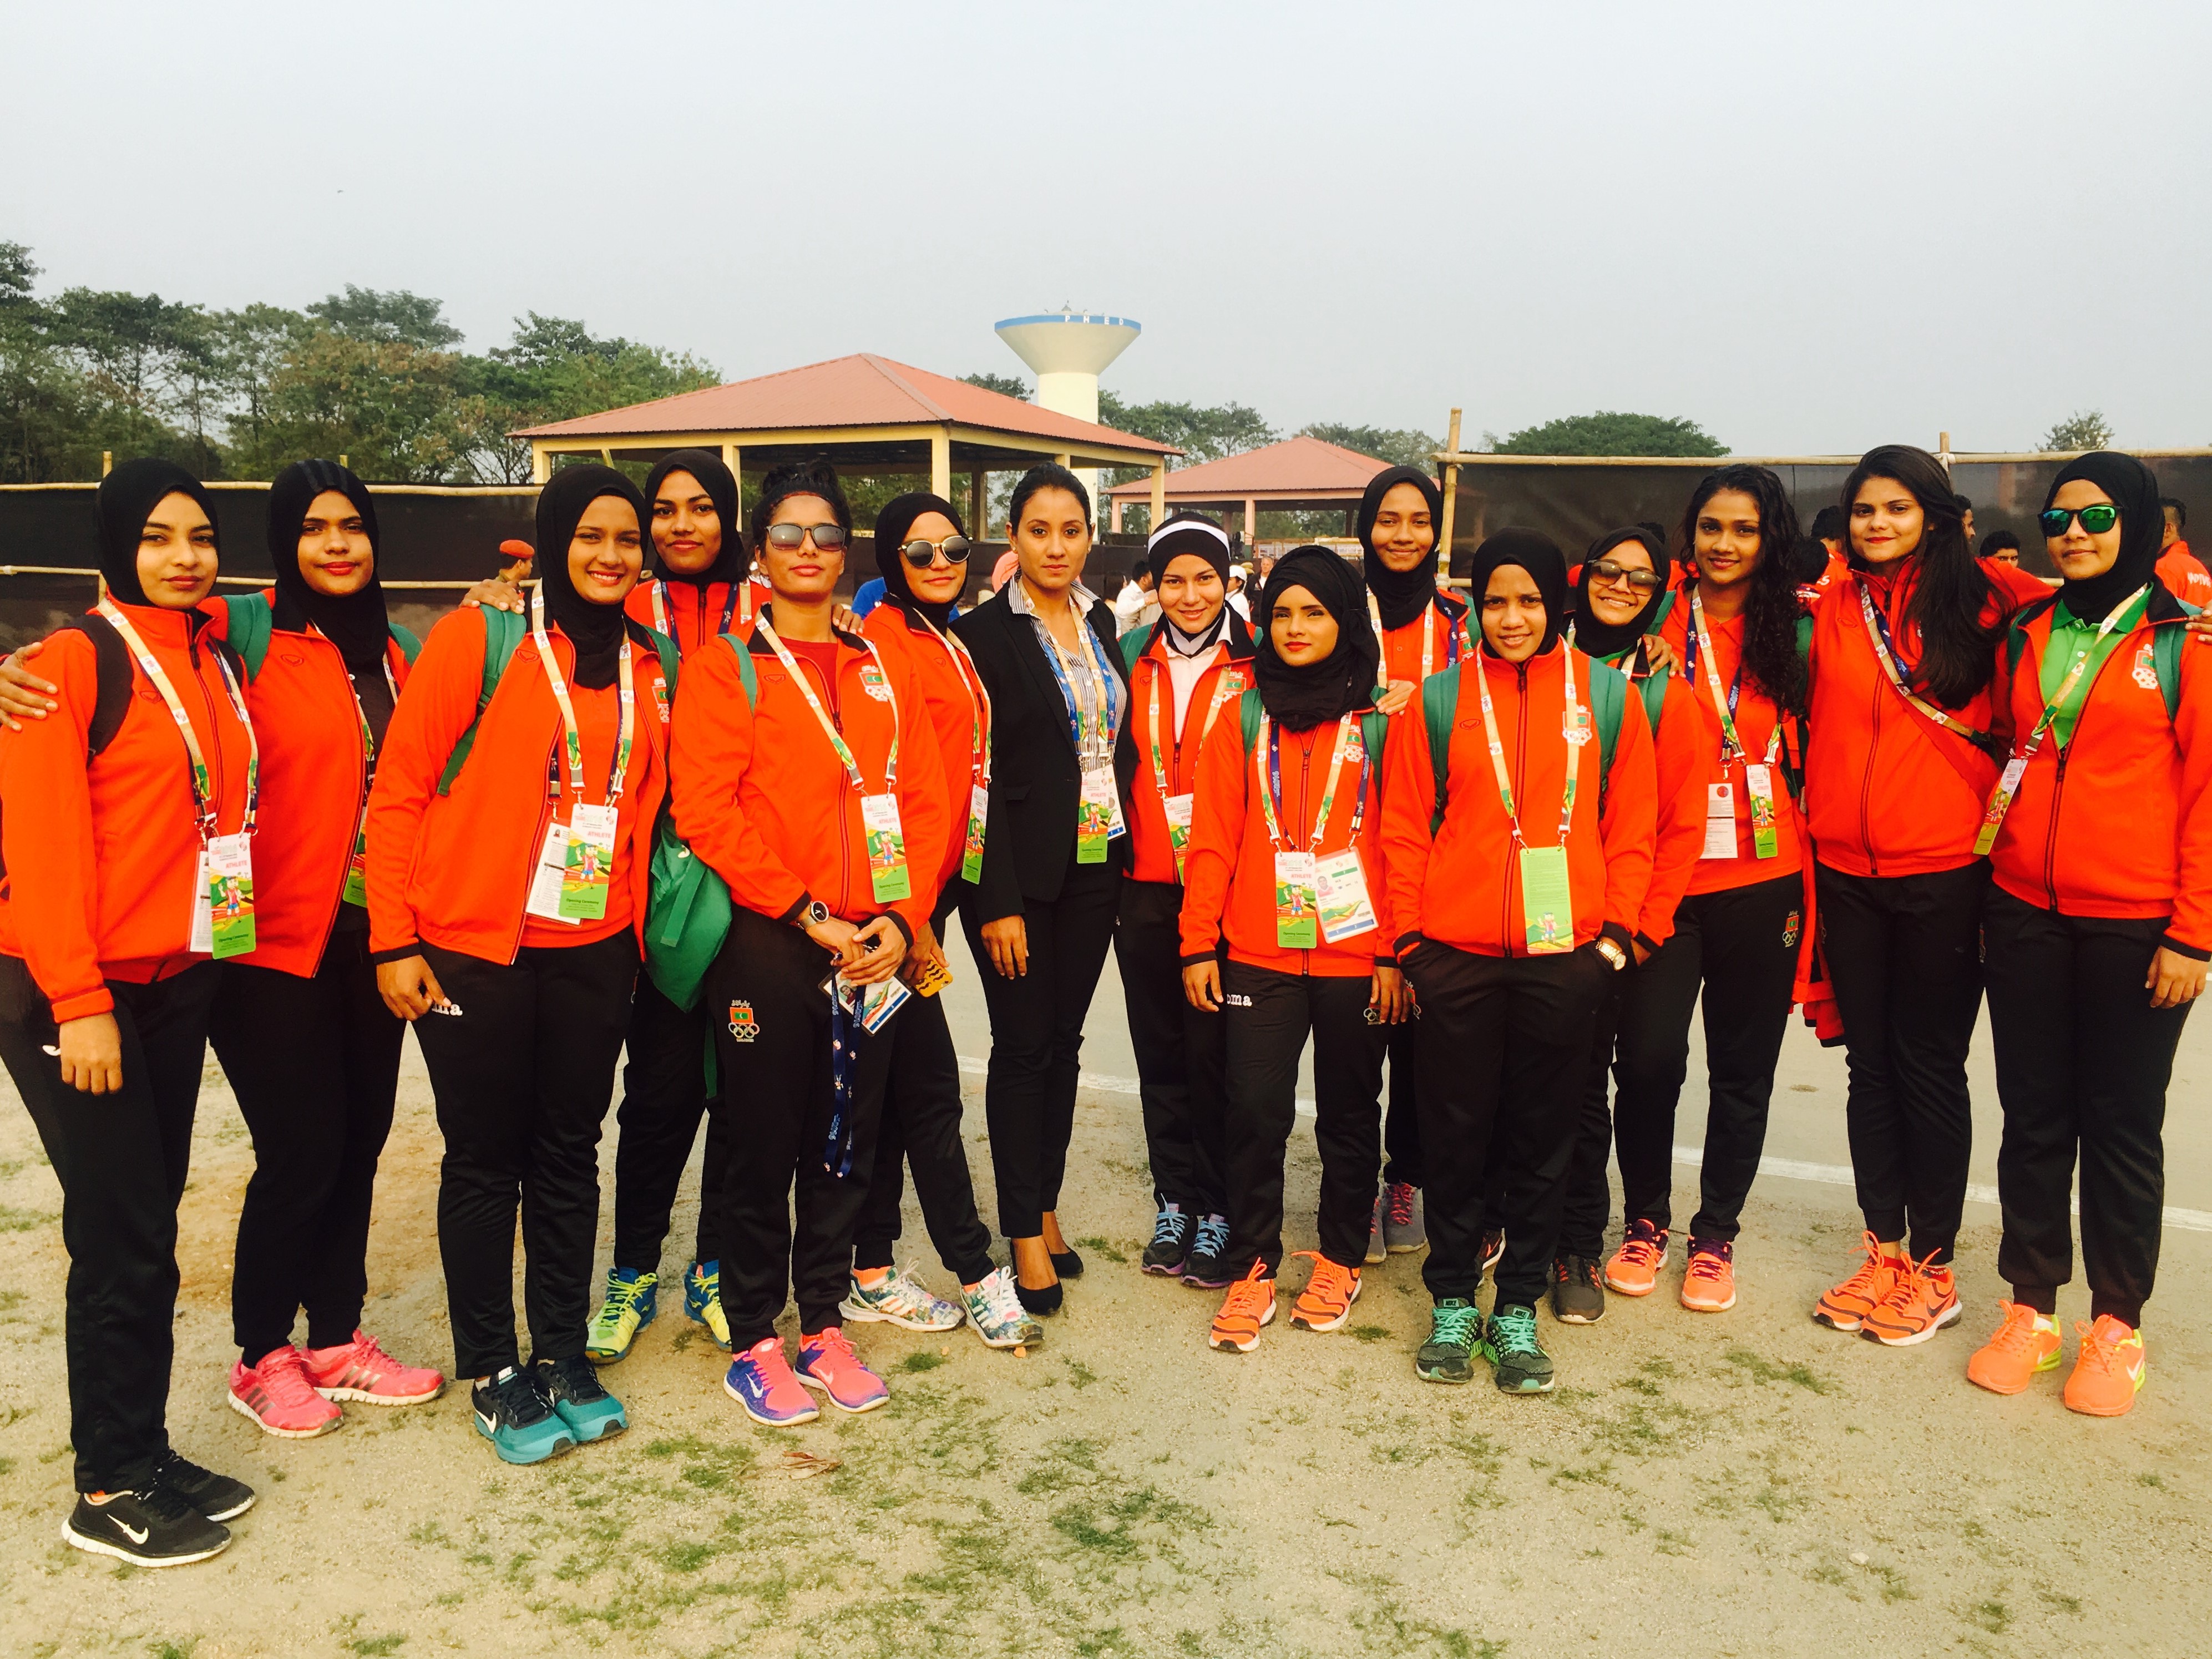 Muna, Deputy Chef De Mission of Maldives Contingent, stands proud with the women's volleyball nation team at 12th South Asian Games 2016. © Muna